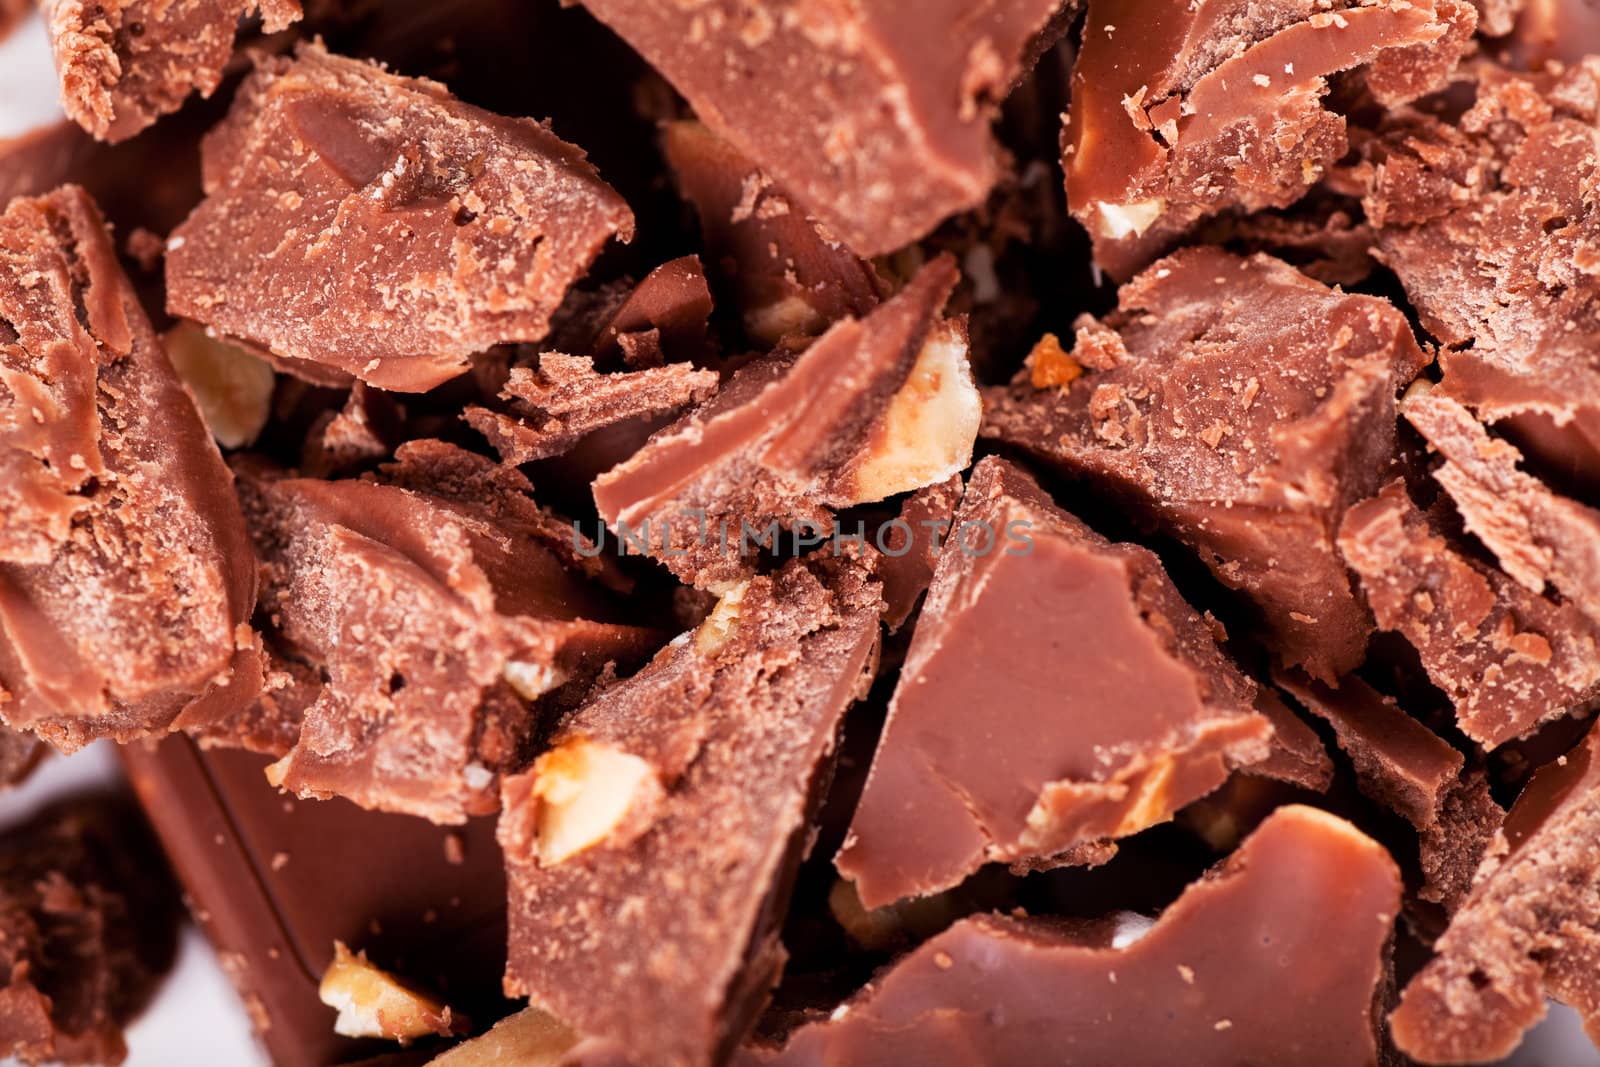 Close-up view of pieces of chocolate